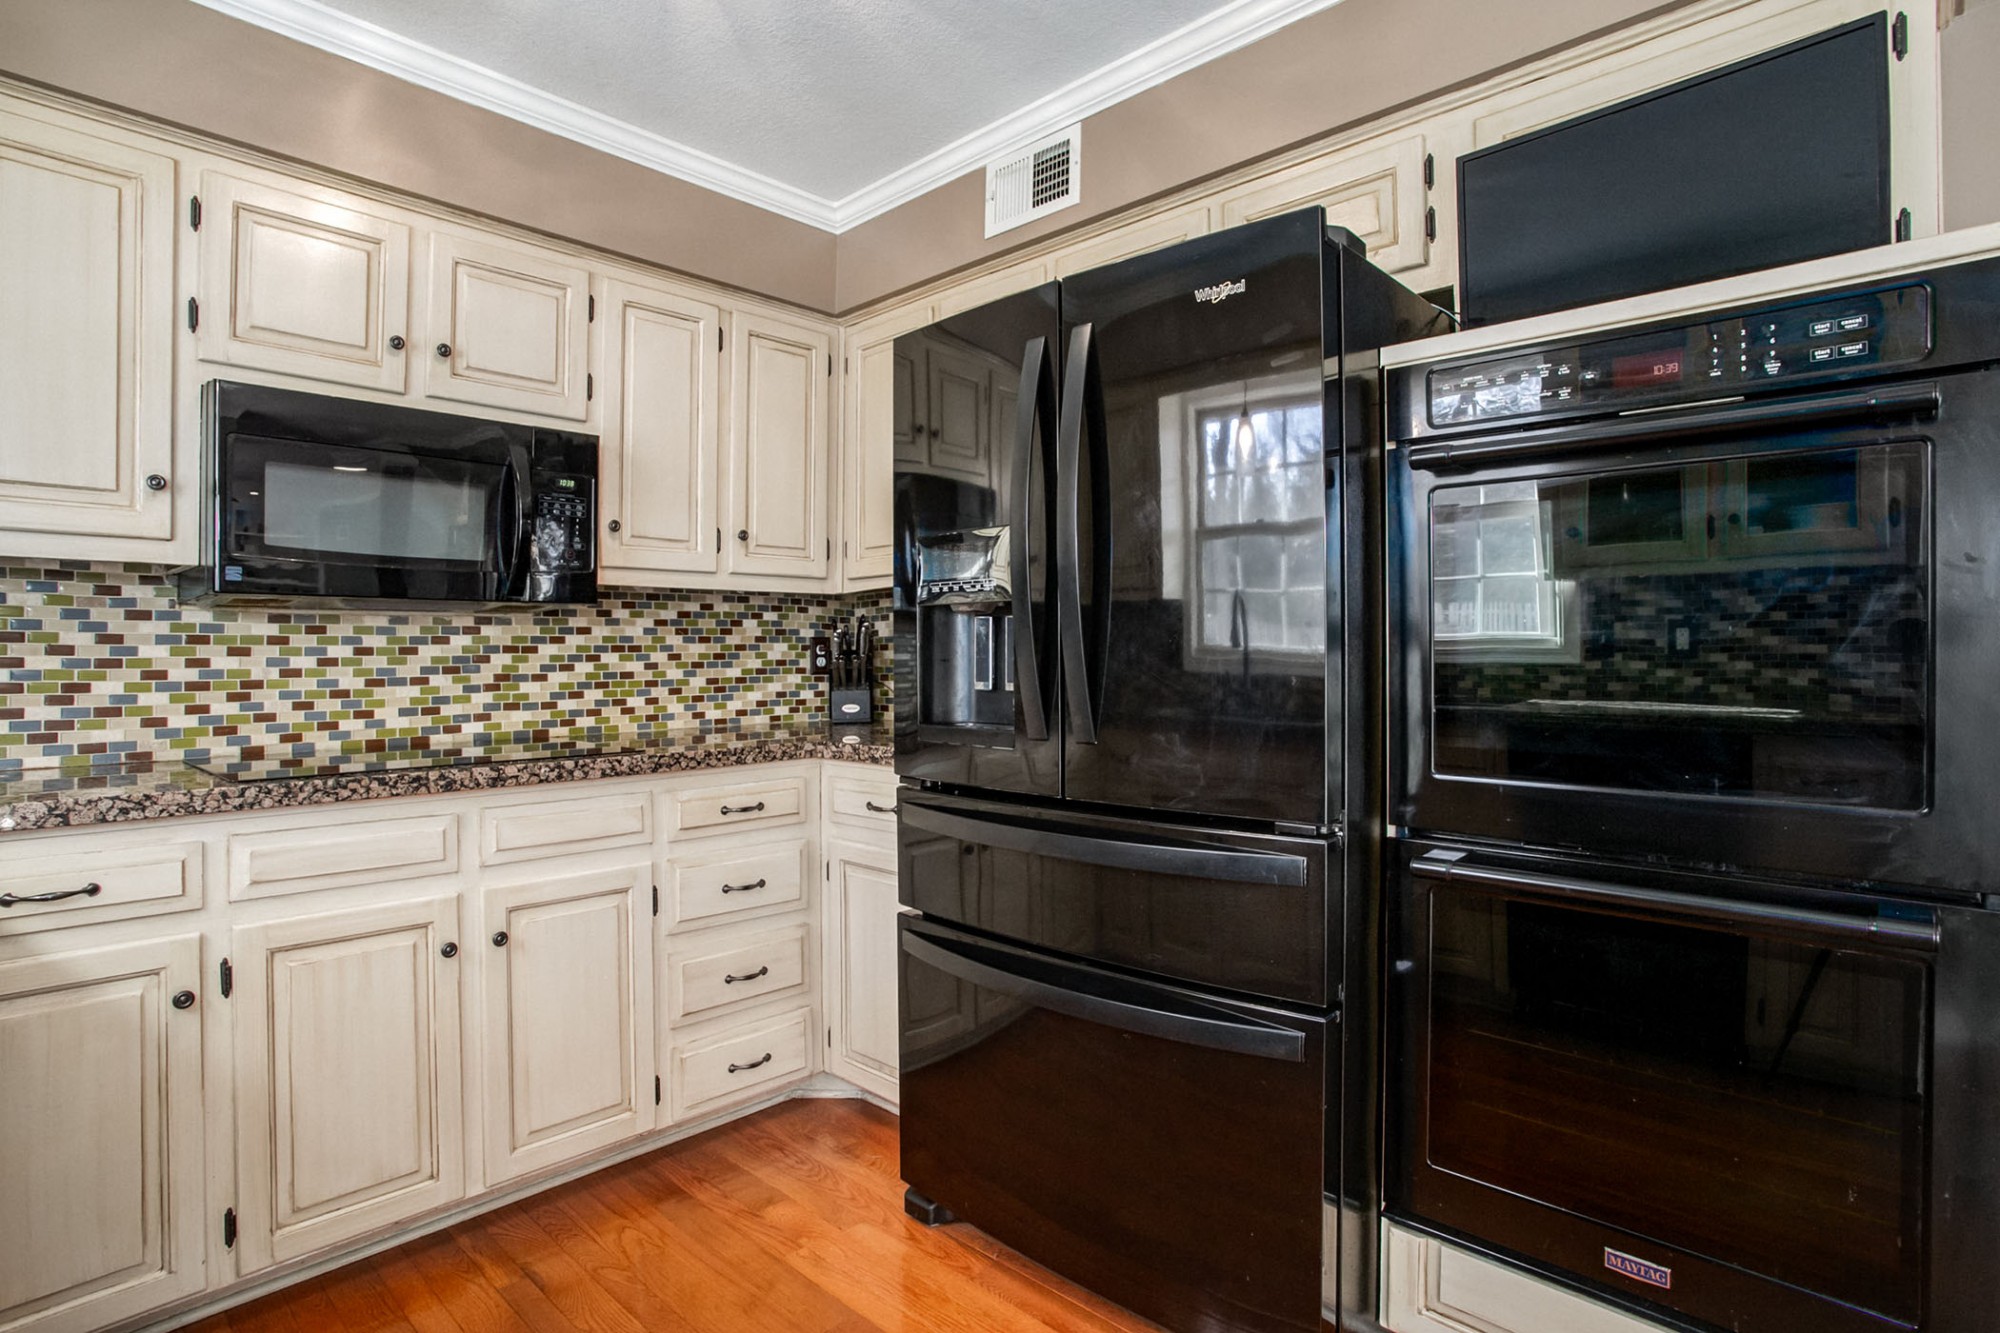 Energy efficient induction cooktop, French door refrigerator with dispensers, dishwasher, built-in microwave, and double wall ovens.